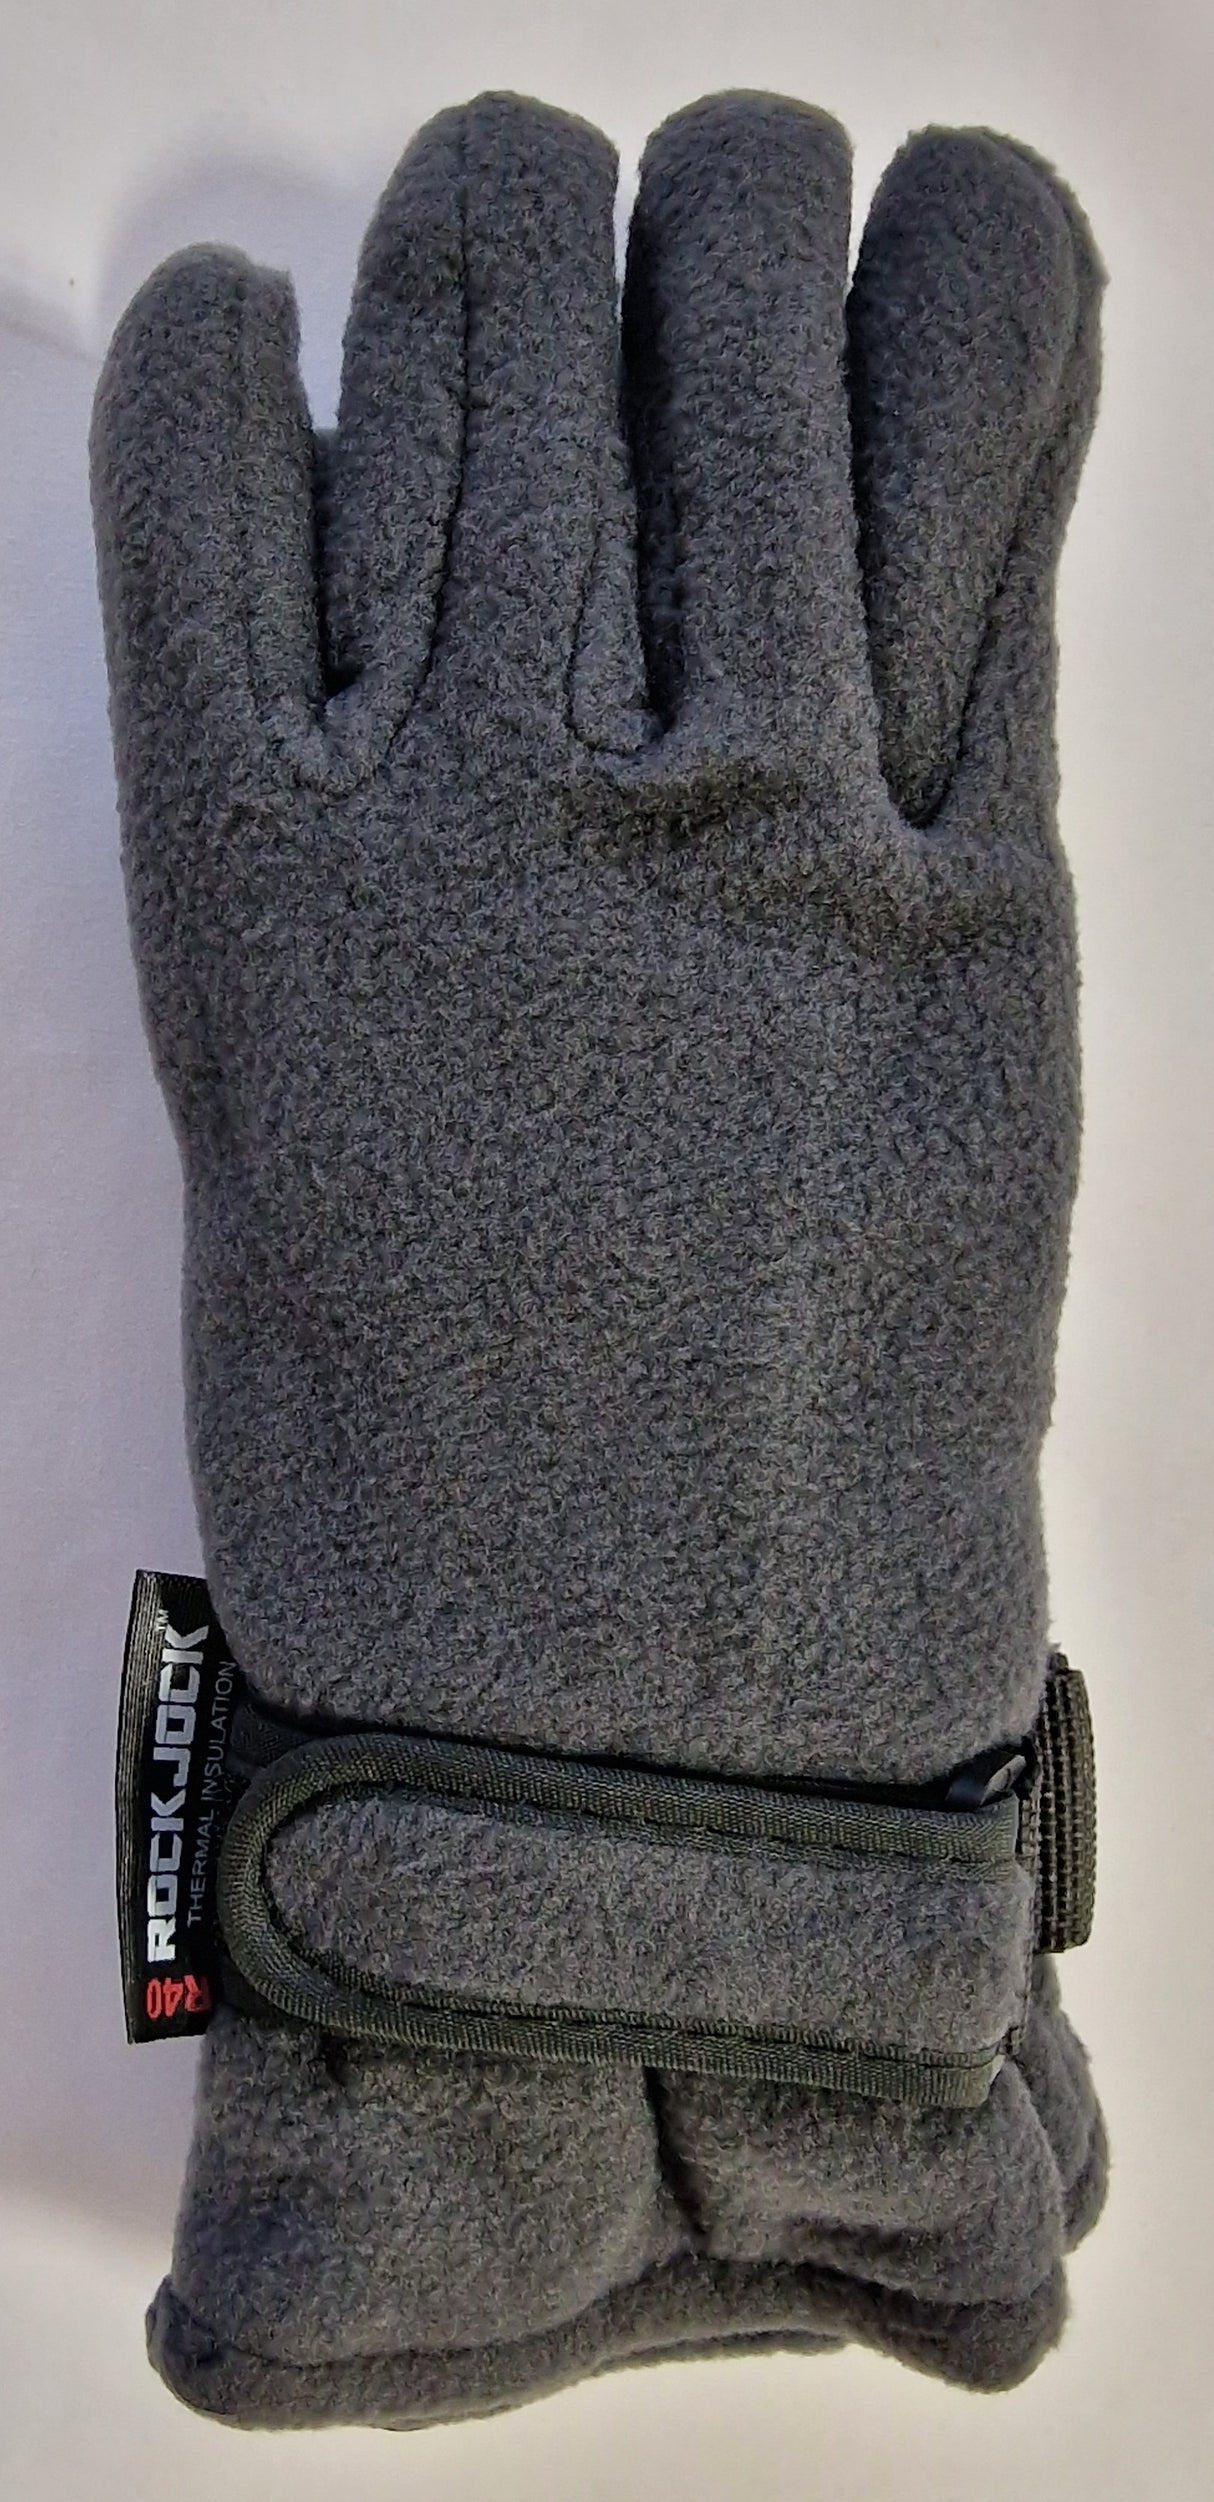 G3 THERMAL GLOVES